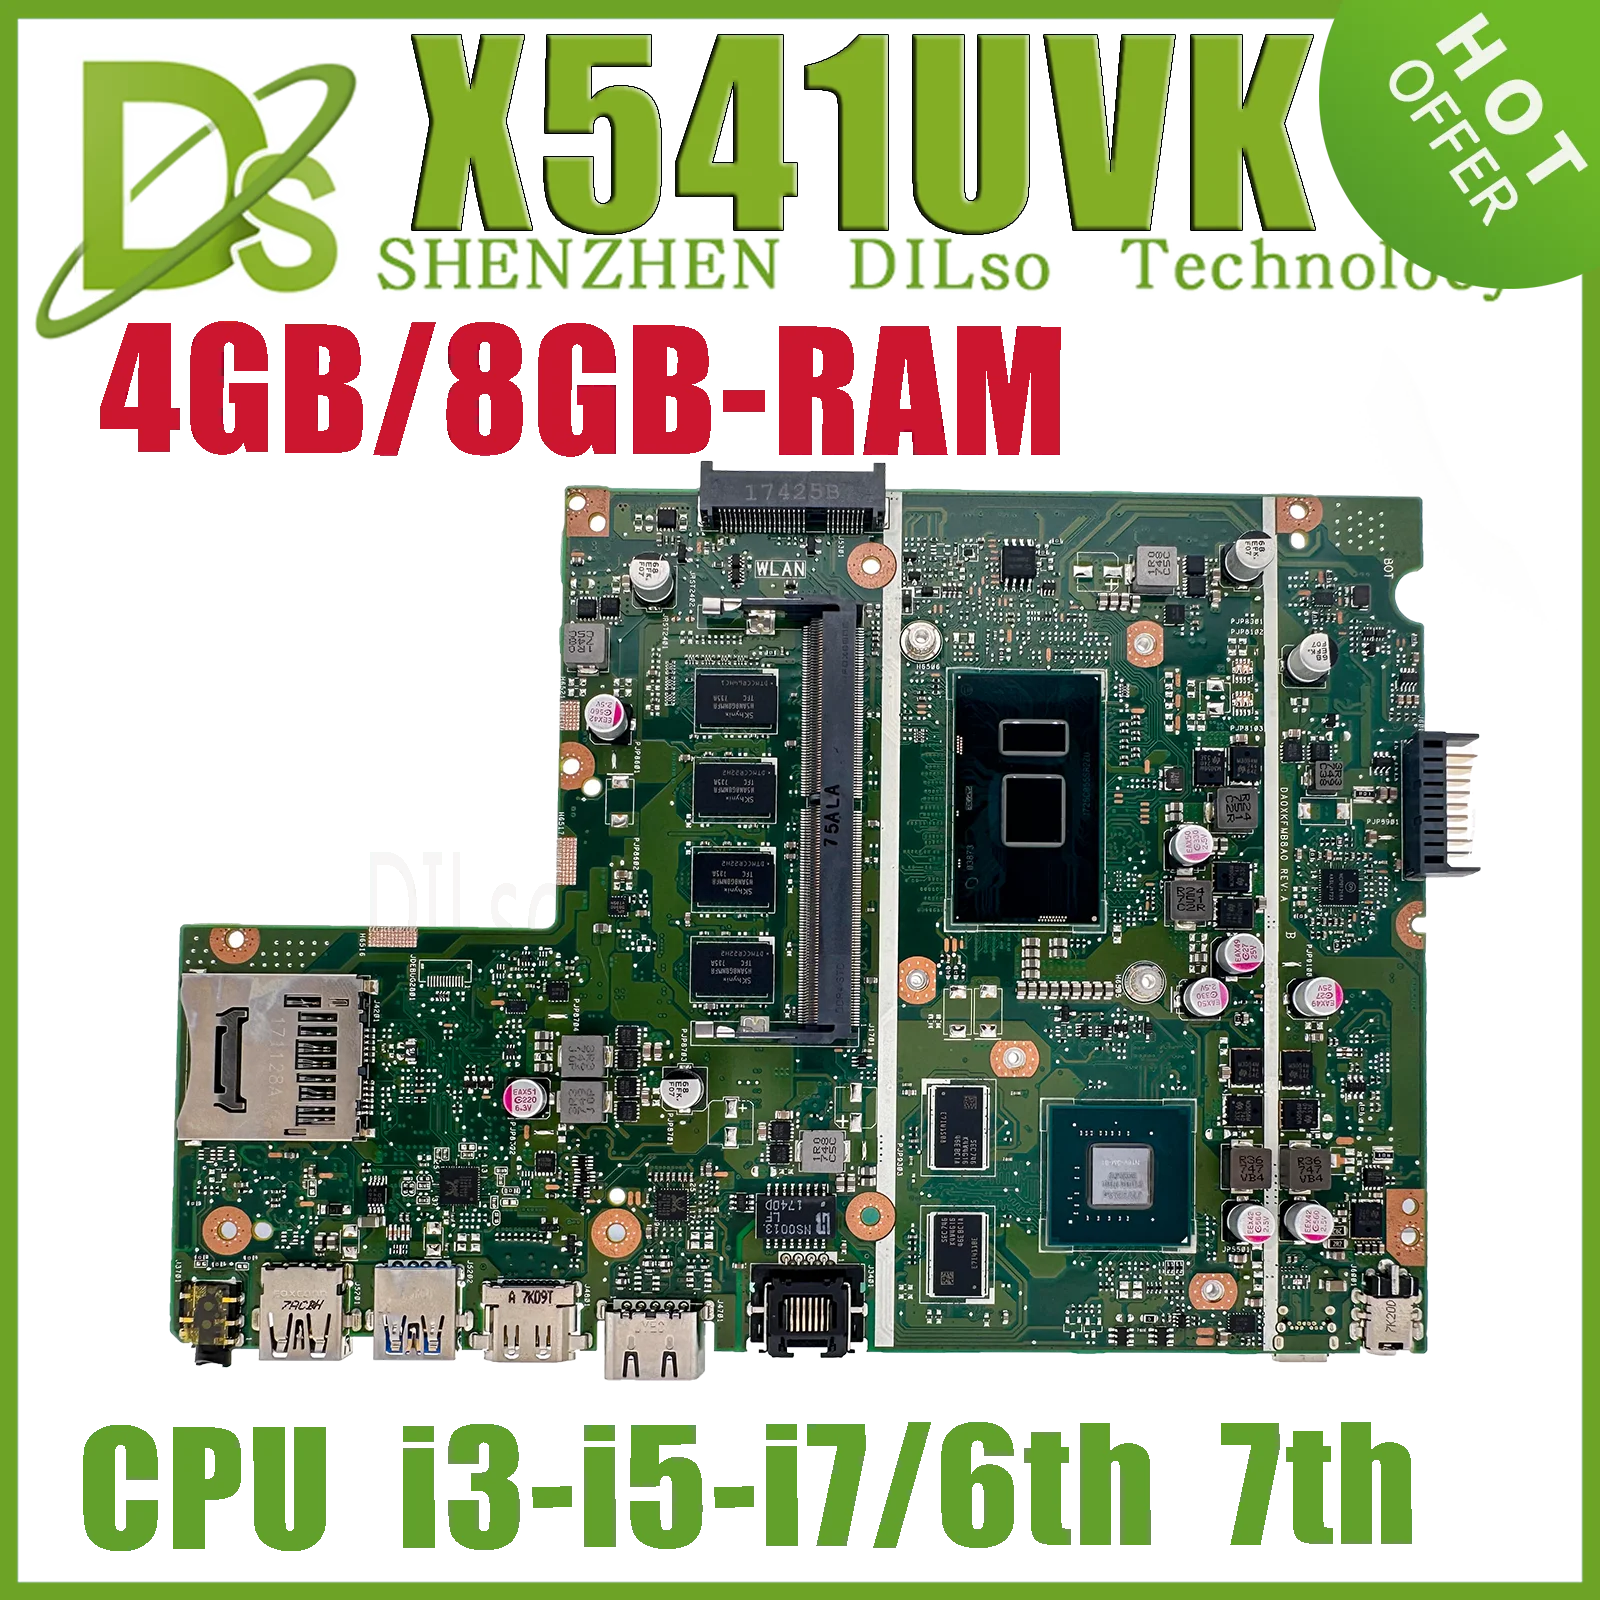 

PLACA X541UV Mainboard For ASUS X541U X541UJ A541U X541UVK K541U Laptop Motherboard With 4GB 8G I3-6TH I5 I7 GT920M 100% Working